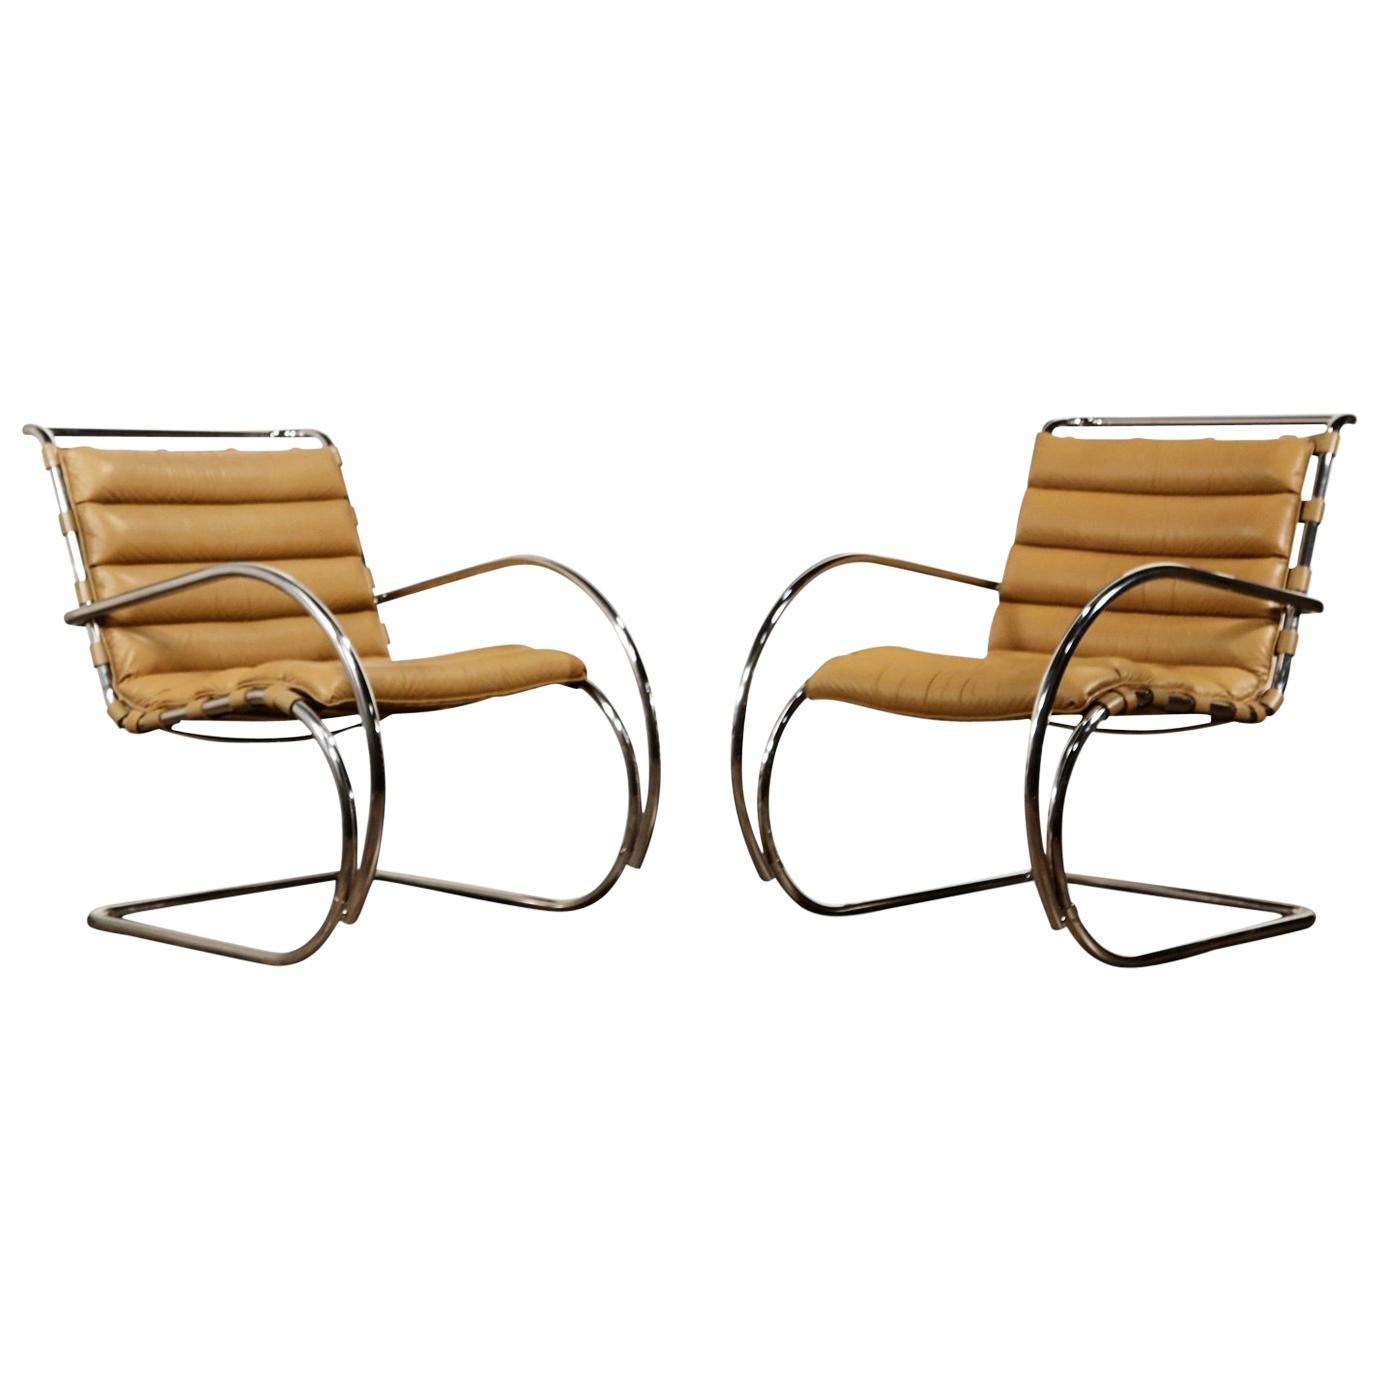 Pair of MR Armchairs by Mies van der Rohe for Knoll International, Signed 1978